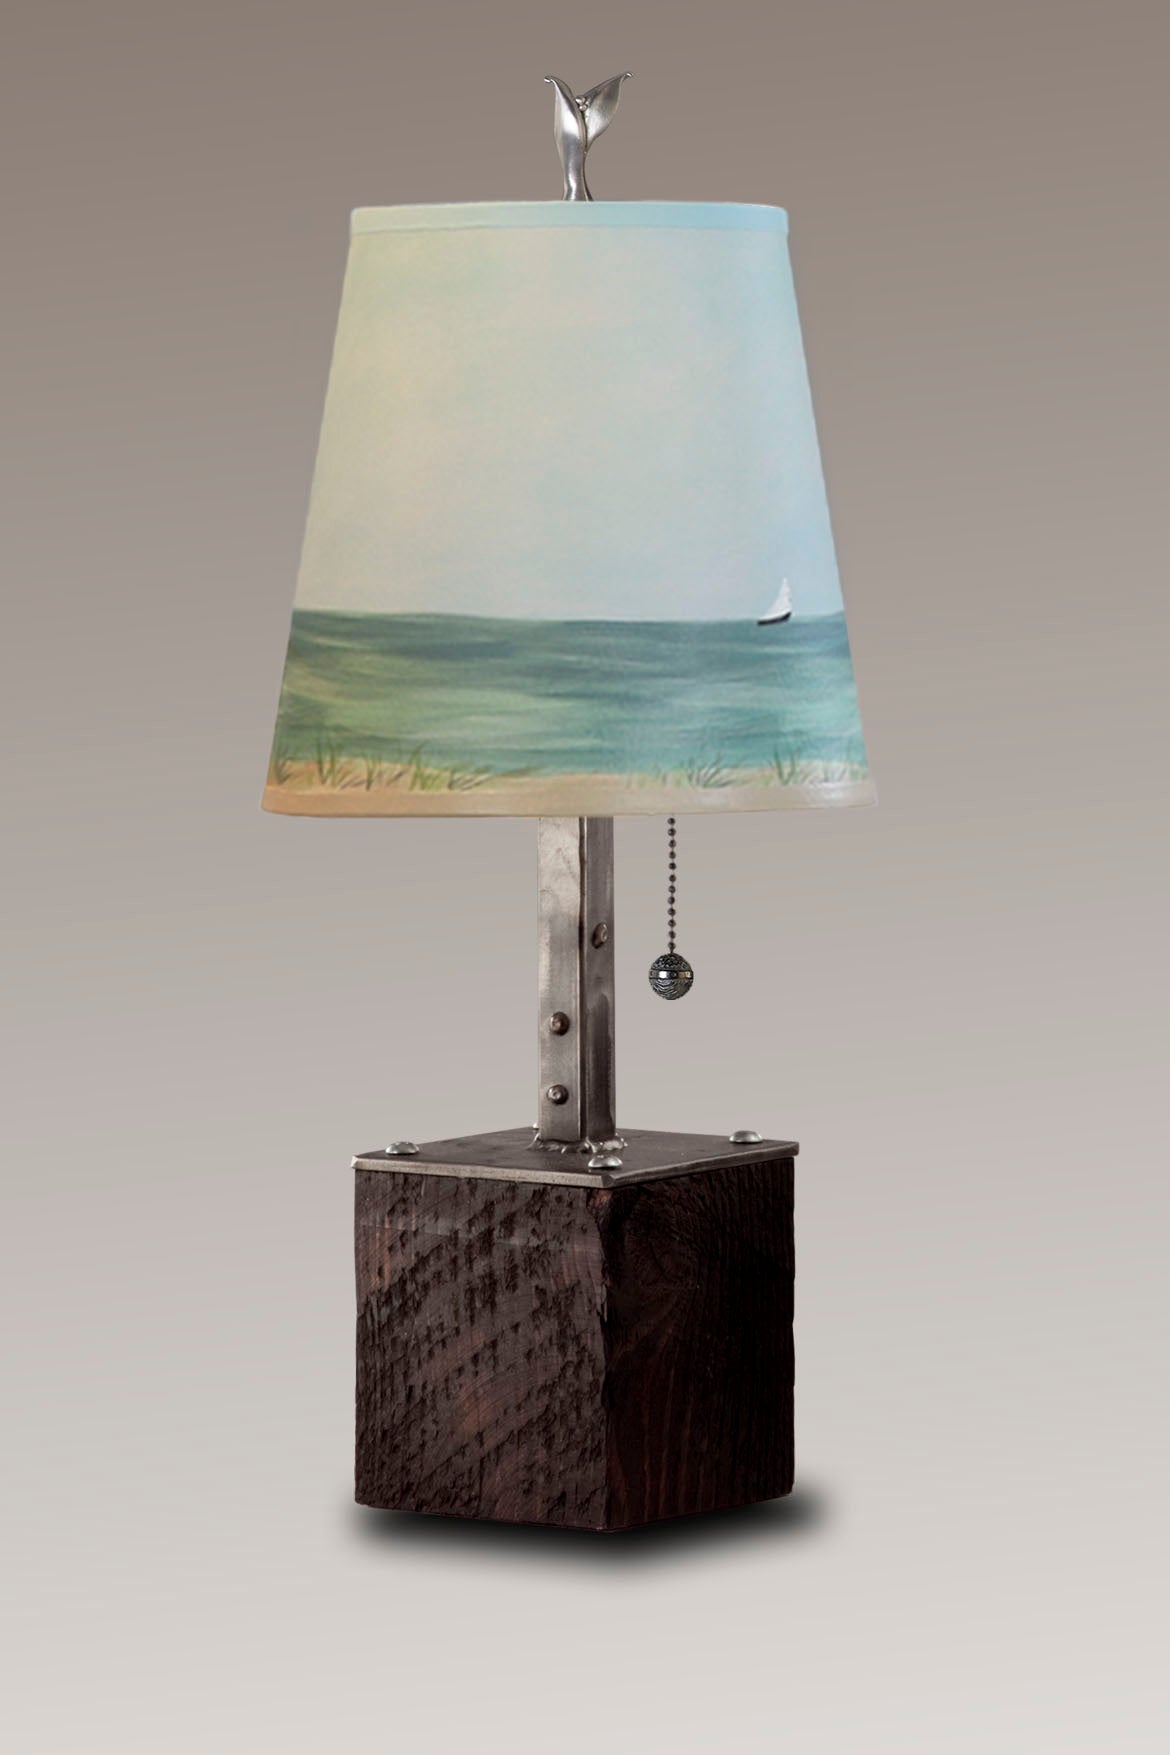 Steel Table Lamp on Reclaimed Wood with Small Drum Shade in Shore